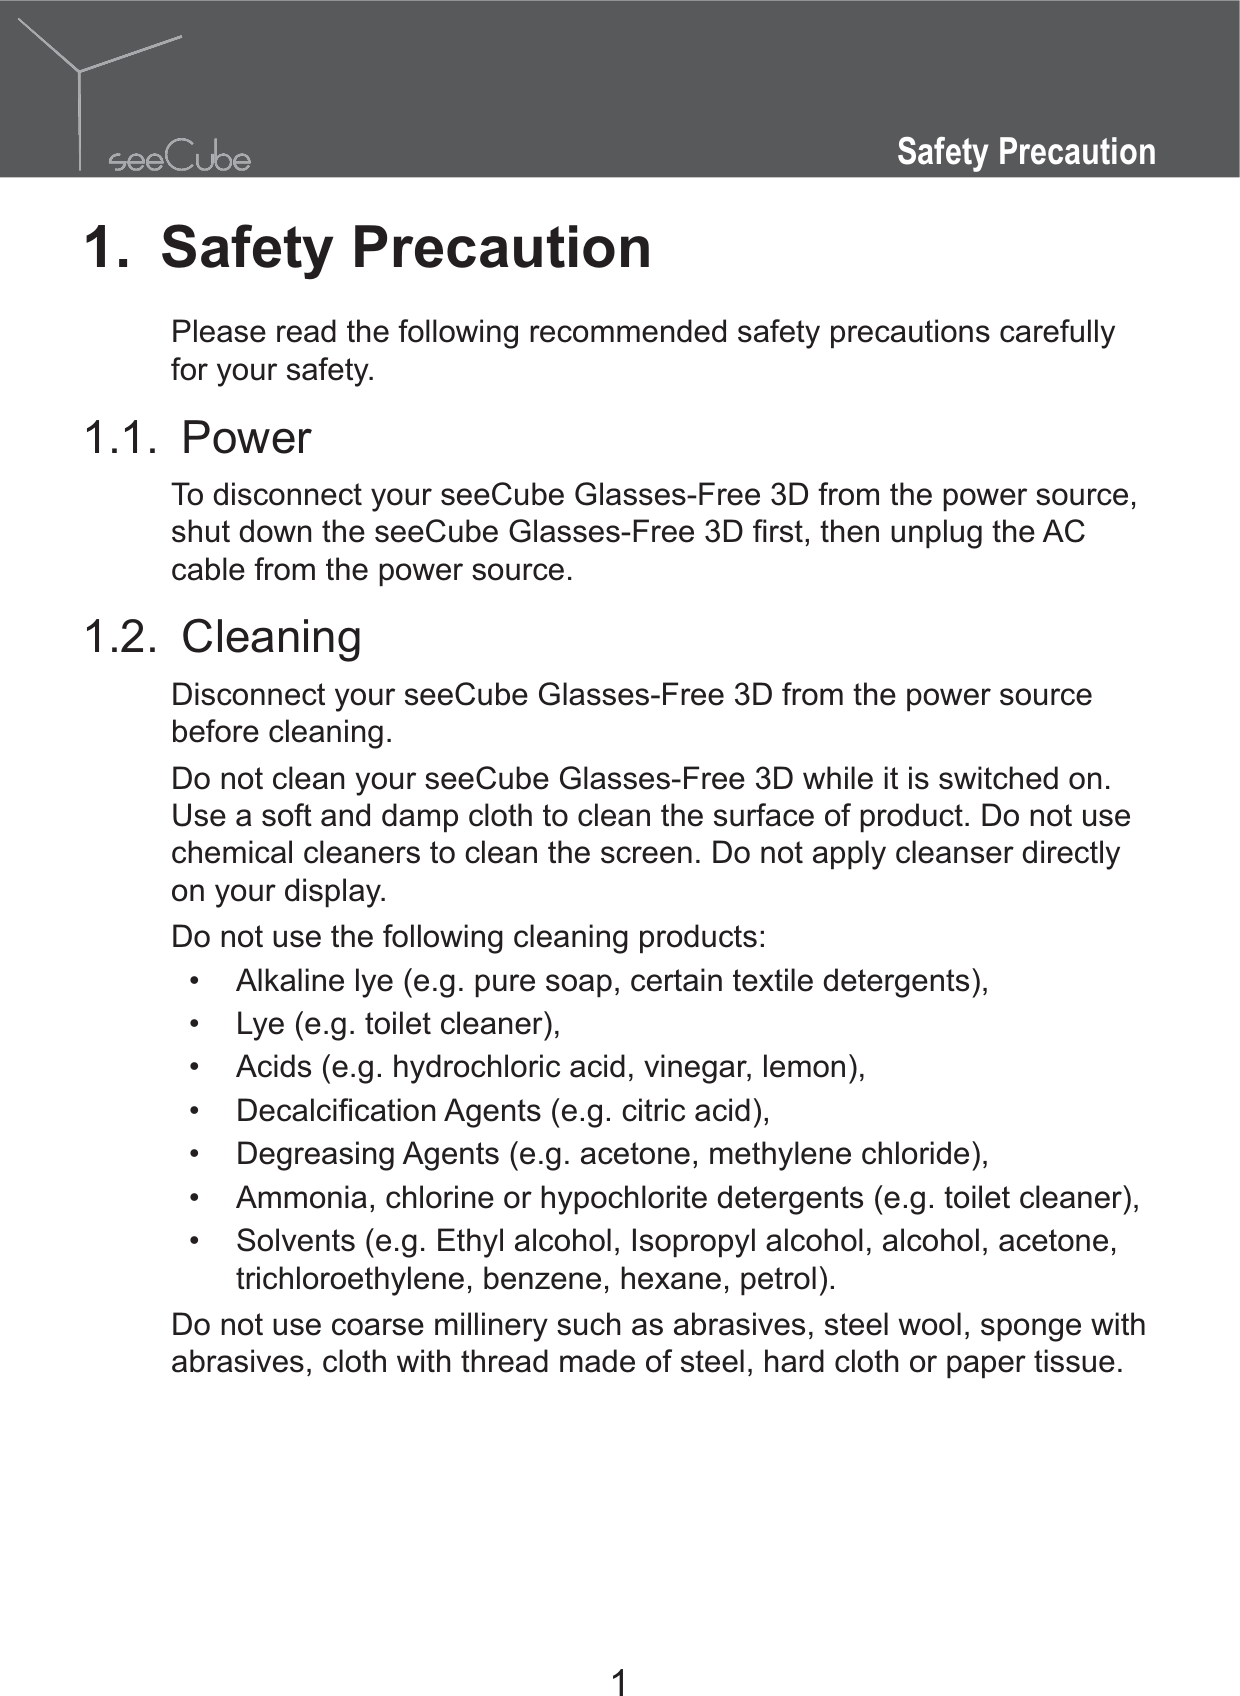 1Safety Precaution1. Safety PrecautionPlease read the following recommended safety precautions carefully for your safety.1.1. PowerTo disconnect your seeCube Glasses-Free 3D from the power source, cable from the power source.1.2. CleaningDisconnect your seeCube Glasses-Free 3D from the power source before cleaning.Do not clean your seeCube Glasses-Free 3D while it is switched on. Use a soft and damp cloth to clean the surface of product. Do not use chemical cleaners to clean the screen. Do not apply cleanser directly on your display.Do not use the following cleaning products: Alkaline lye (e.g. pure soap, certain textile detergents), Lye (e.g. toilet cleaner), Acids (e.g. hydrochloric acid, vinegar, lemon),  Degreasing Agents (e.g. acetone, methylene chloride), Ammonia, chlorine or hypochlorite detergents (e.g. toilet cleaner), Solvents (e.g. Ethyl alcohol, Isopropyl alcohol, alcohol, acetone, trichloroethylene, benzene, hexane, petrol).Do not use coarse millinery such as abrasives, steel wool, sponge with abrasives, cloth with thread made of steel, hard cloth or paper tissue.